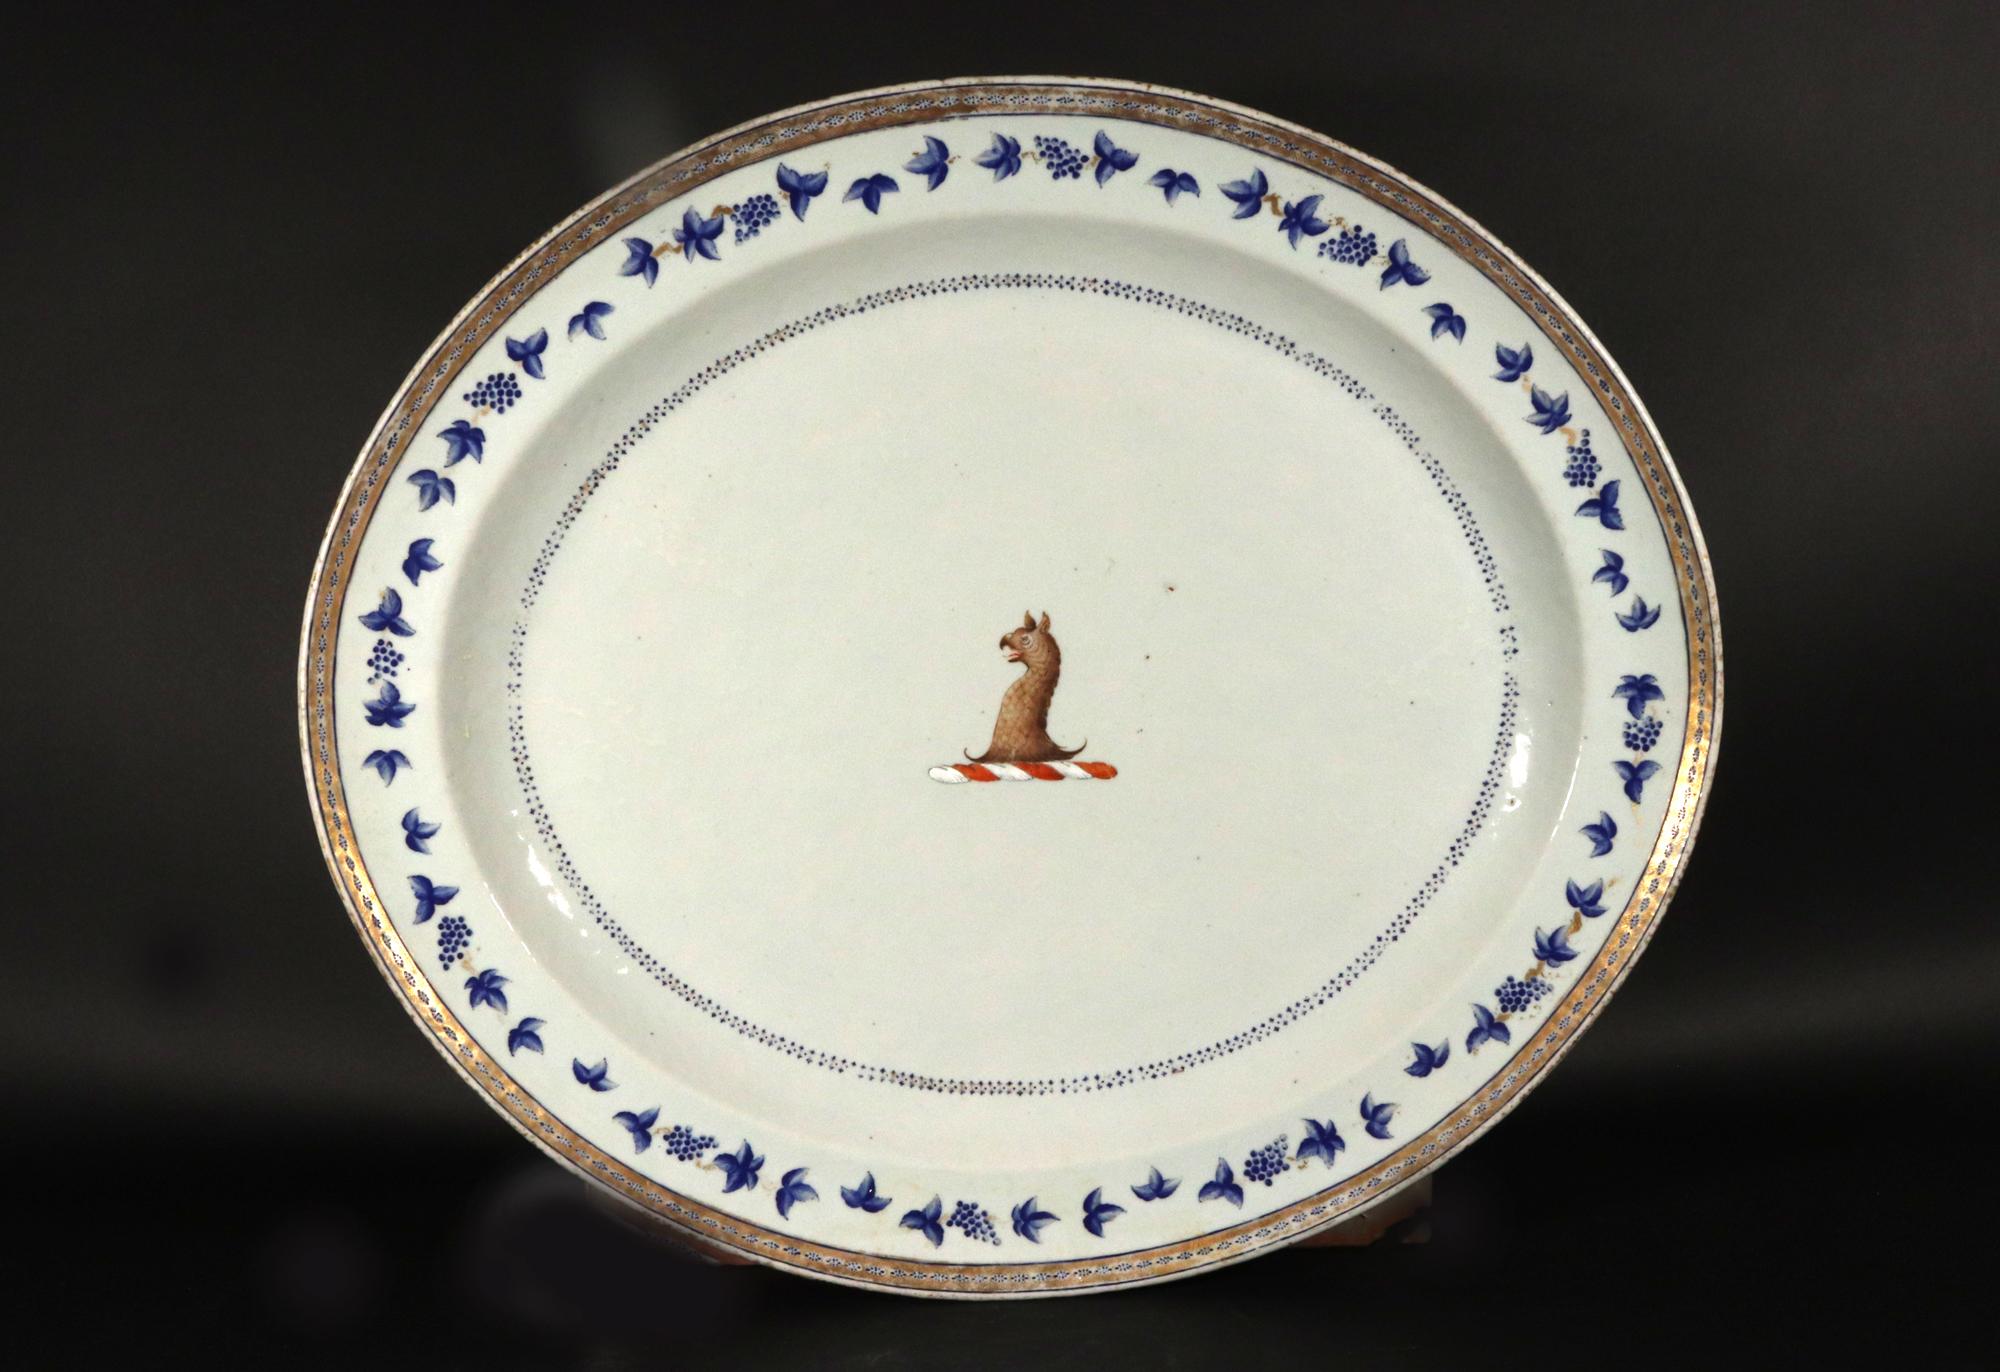 Chinese Export Porcelain Blue Enamel Border Armorial Crest Dish
Circa 1780

The Chinese Export porcelain armorial dish is of oval shape with a central large crest of an eagle's head with a triple dotted blue enamel border of stars at the edge of the